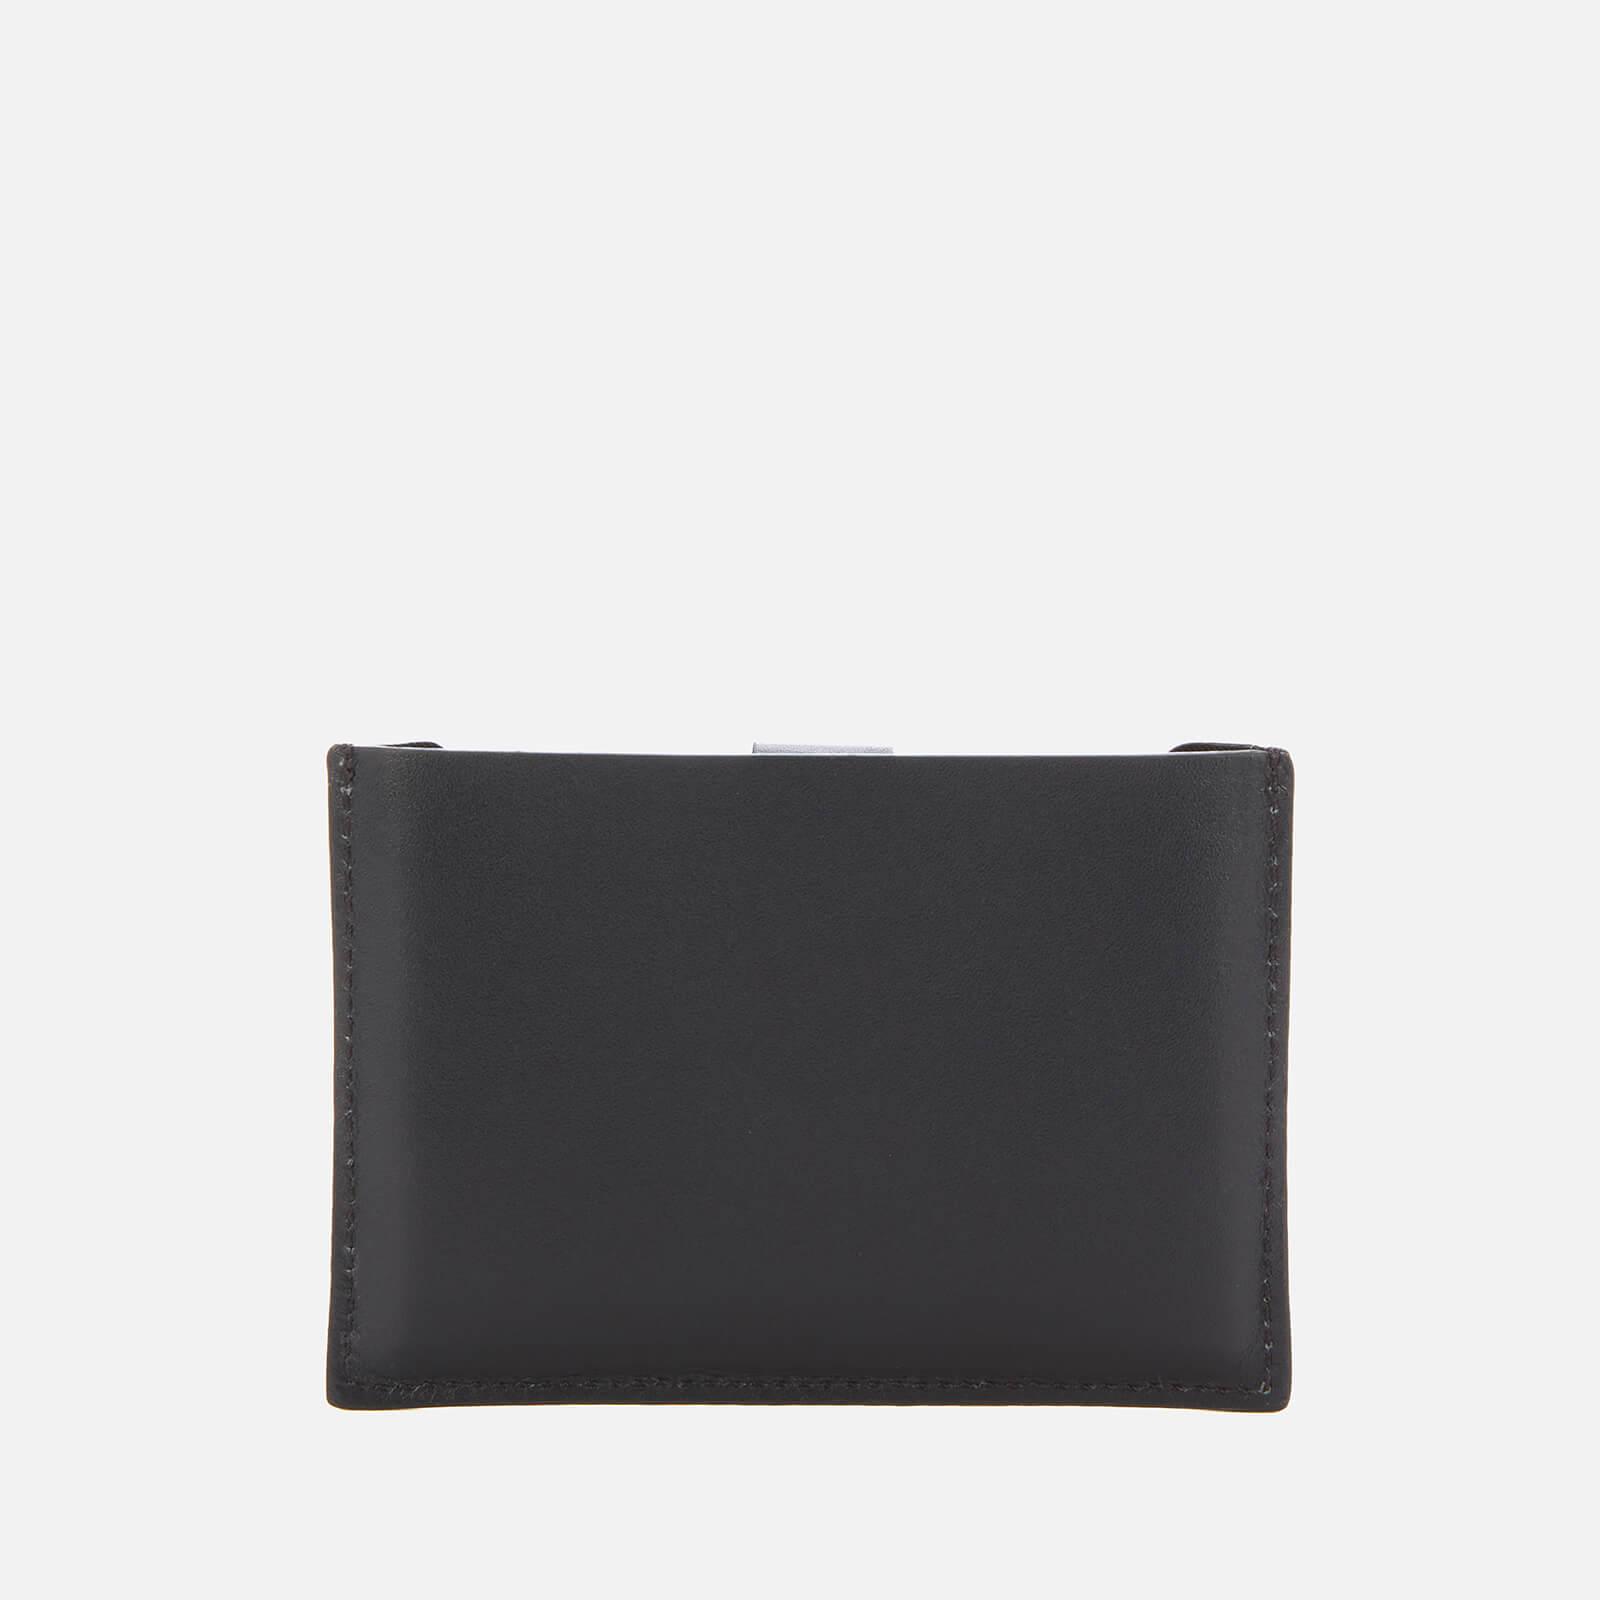 Pull Out Signature Stripe Wallet